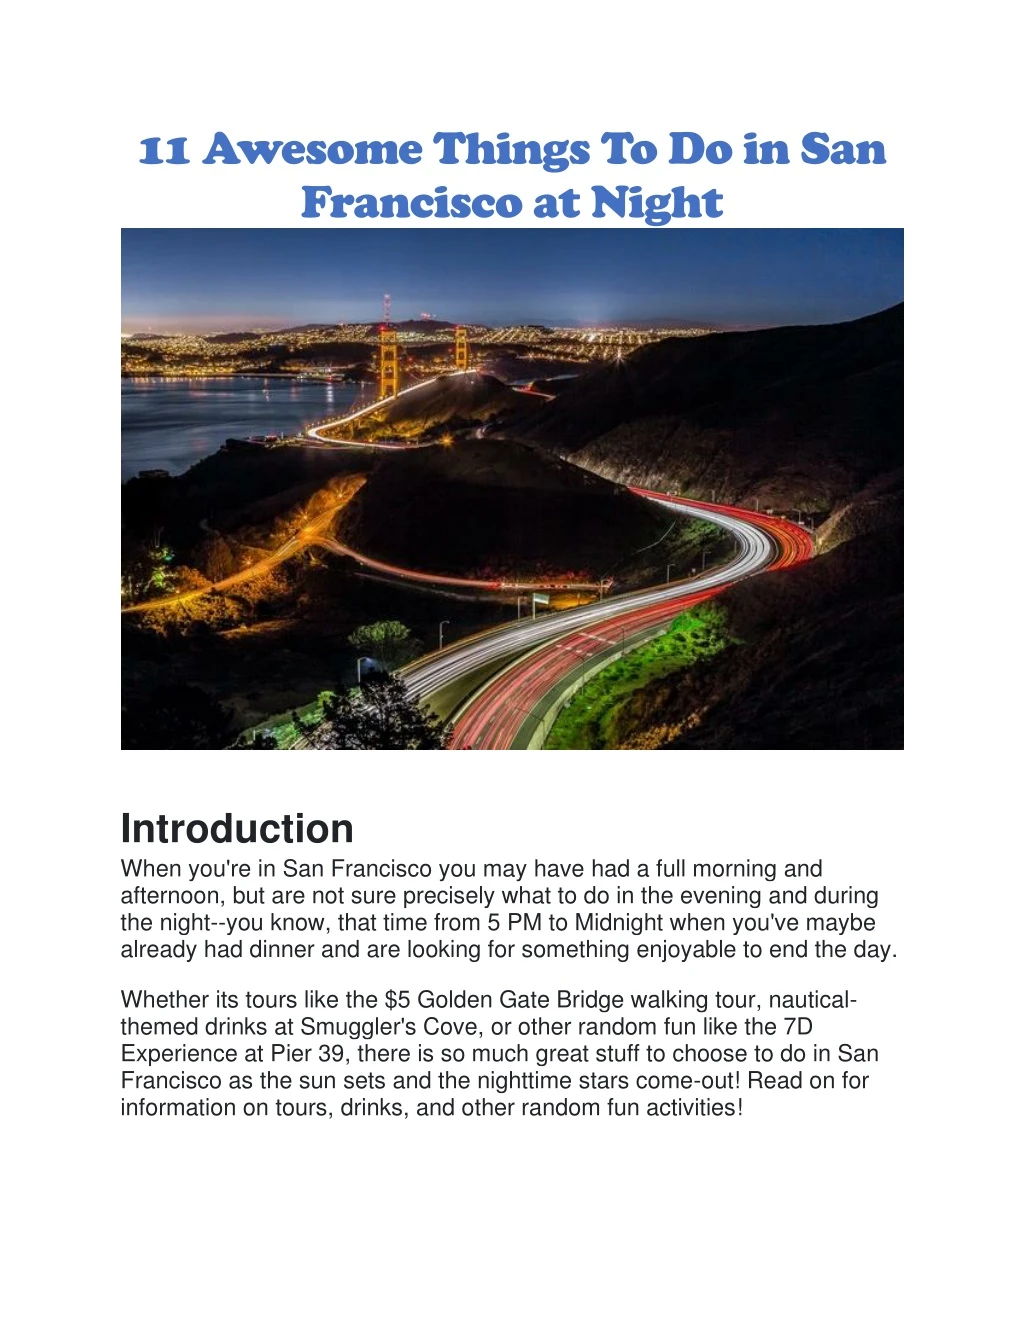 11 awesome things to do in san francisco at night